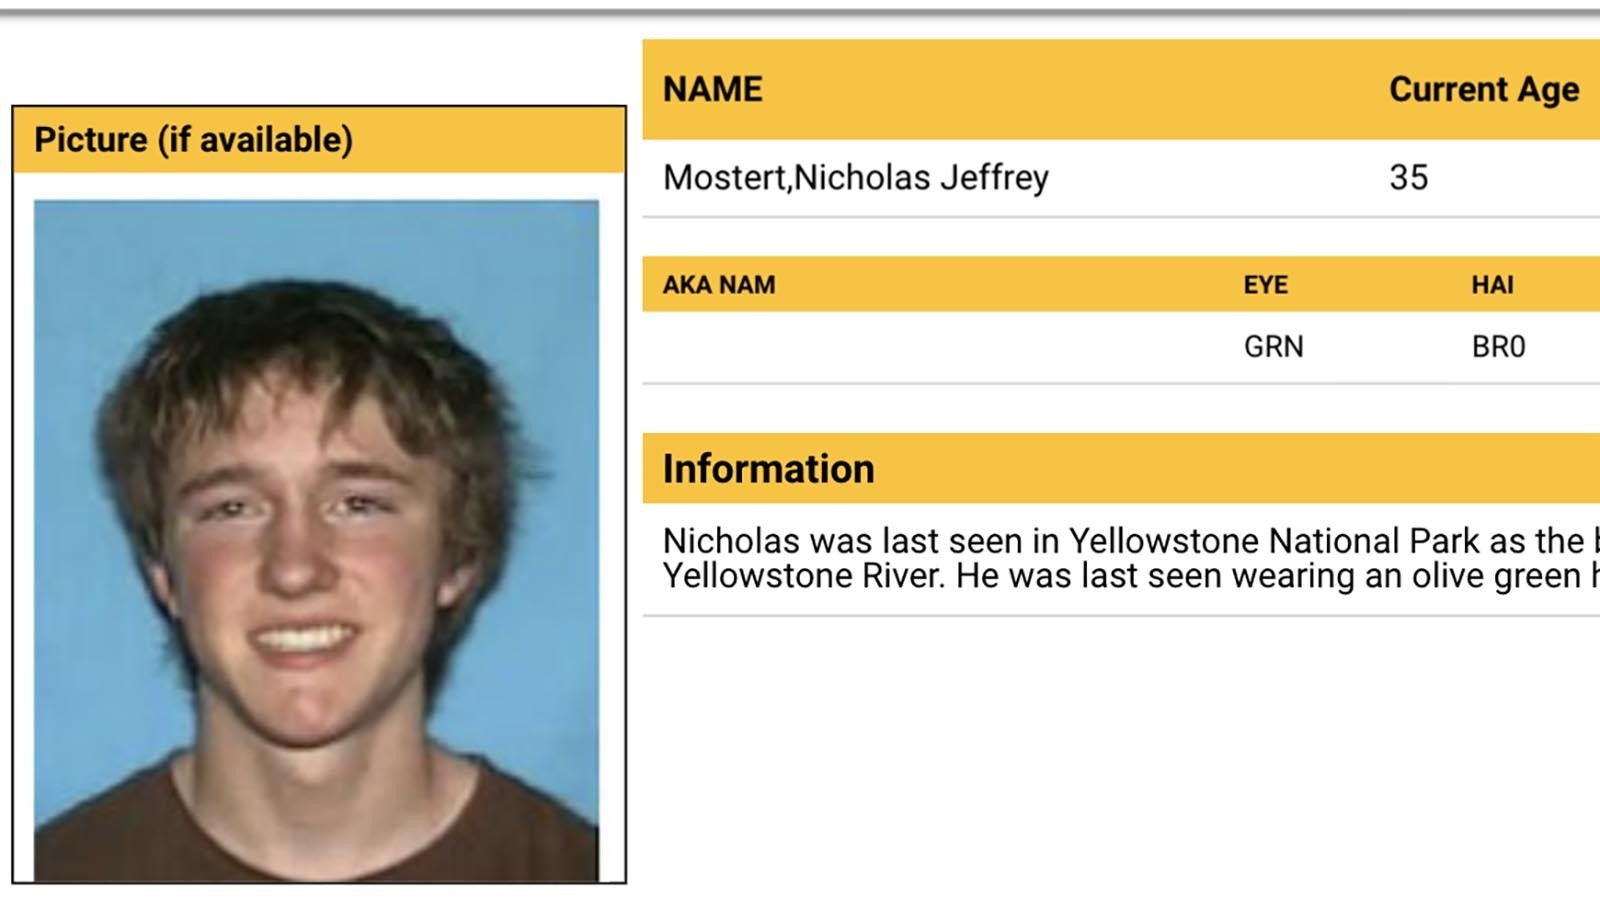 Nicholas Mostert was 20 when he is presumed to have drowned after jumping into the Lower Falls of the Yellowstone River on June 16, 2009.